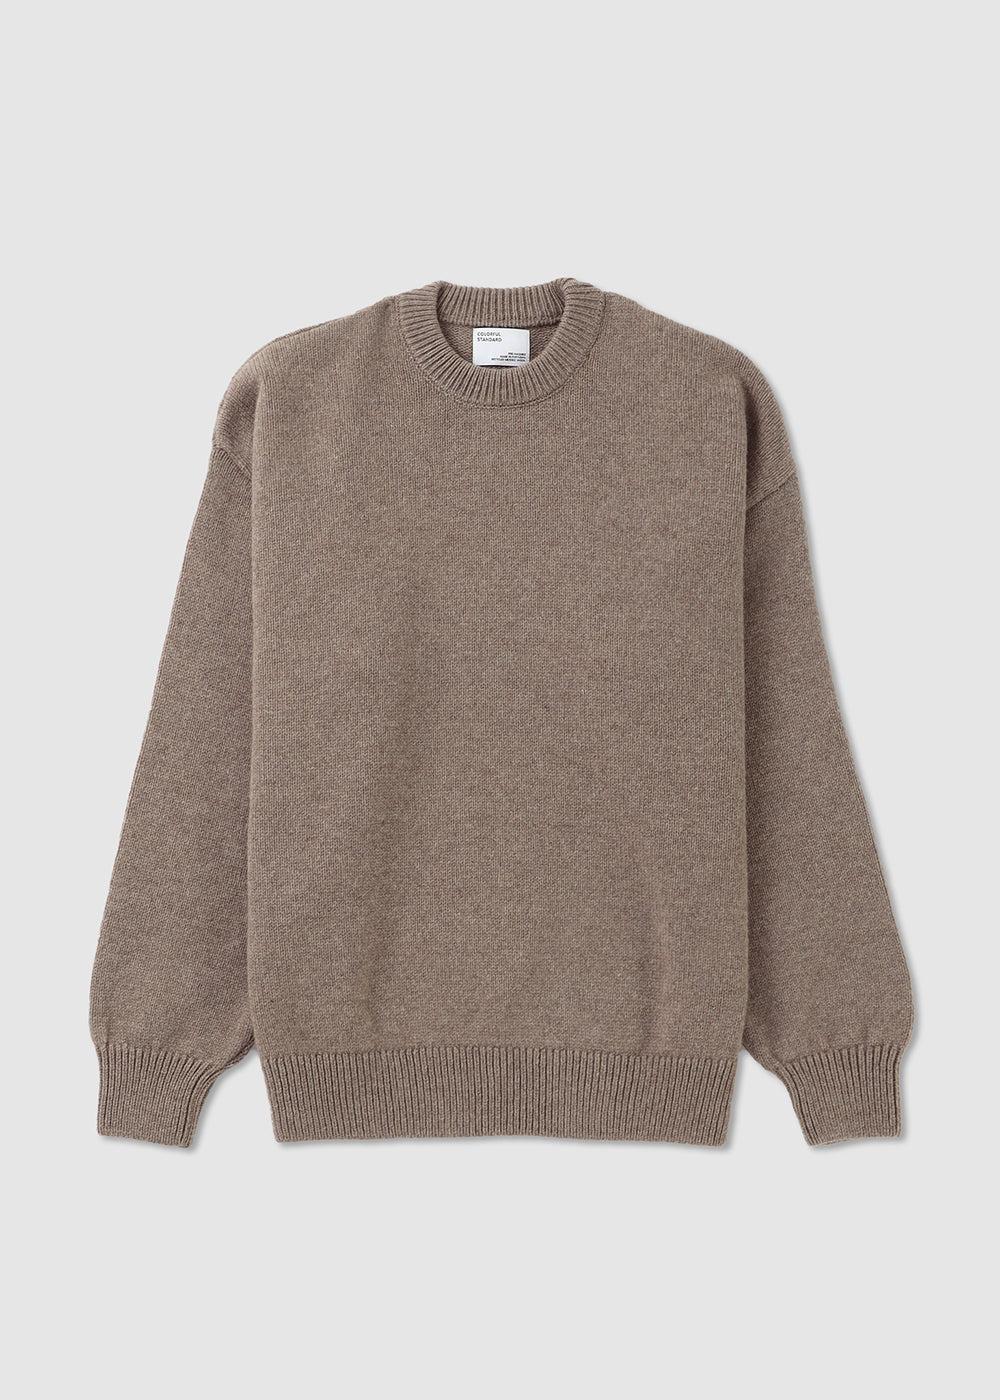 COLORFUL STANDARD Oversized Merino Wool Crew Neck Jumper in Natural for Men  | Lyst